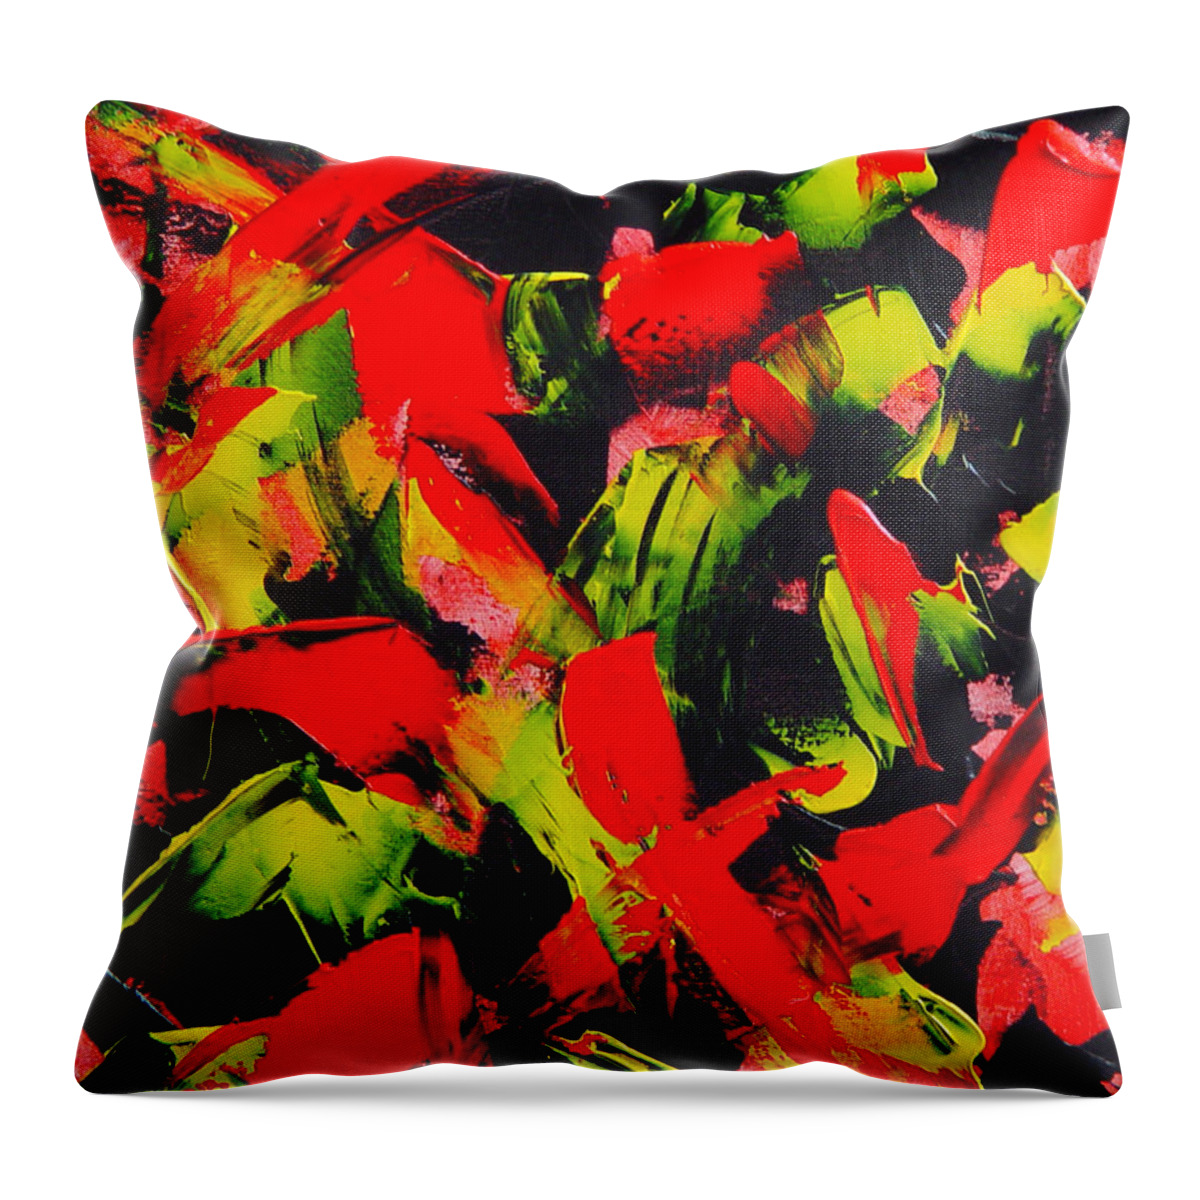 Black Throw Pillow featuring the painting Transitions III by Dean Triolo